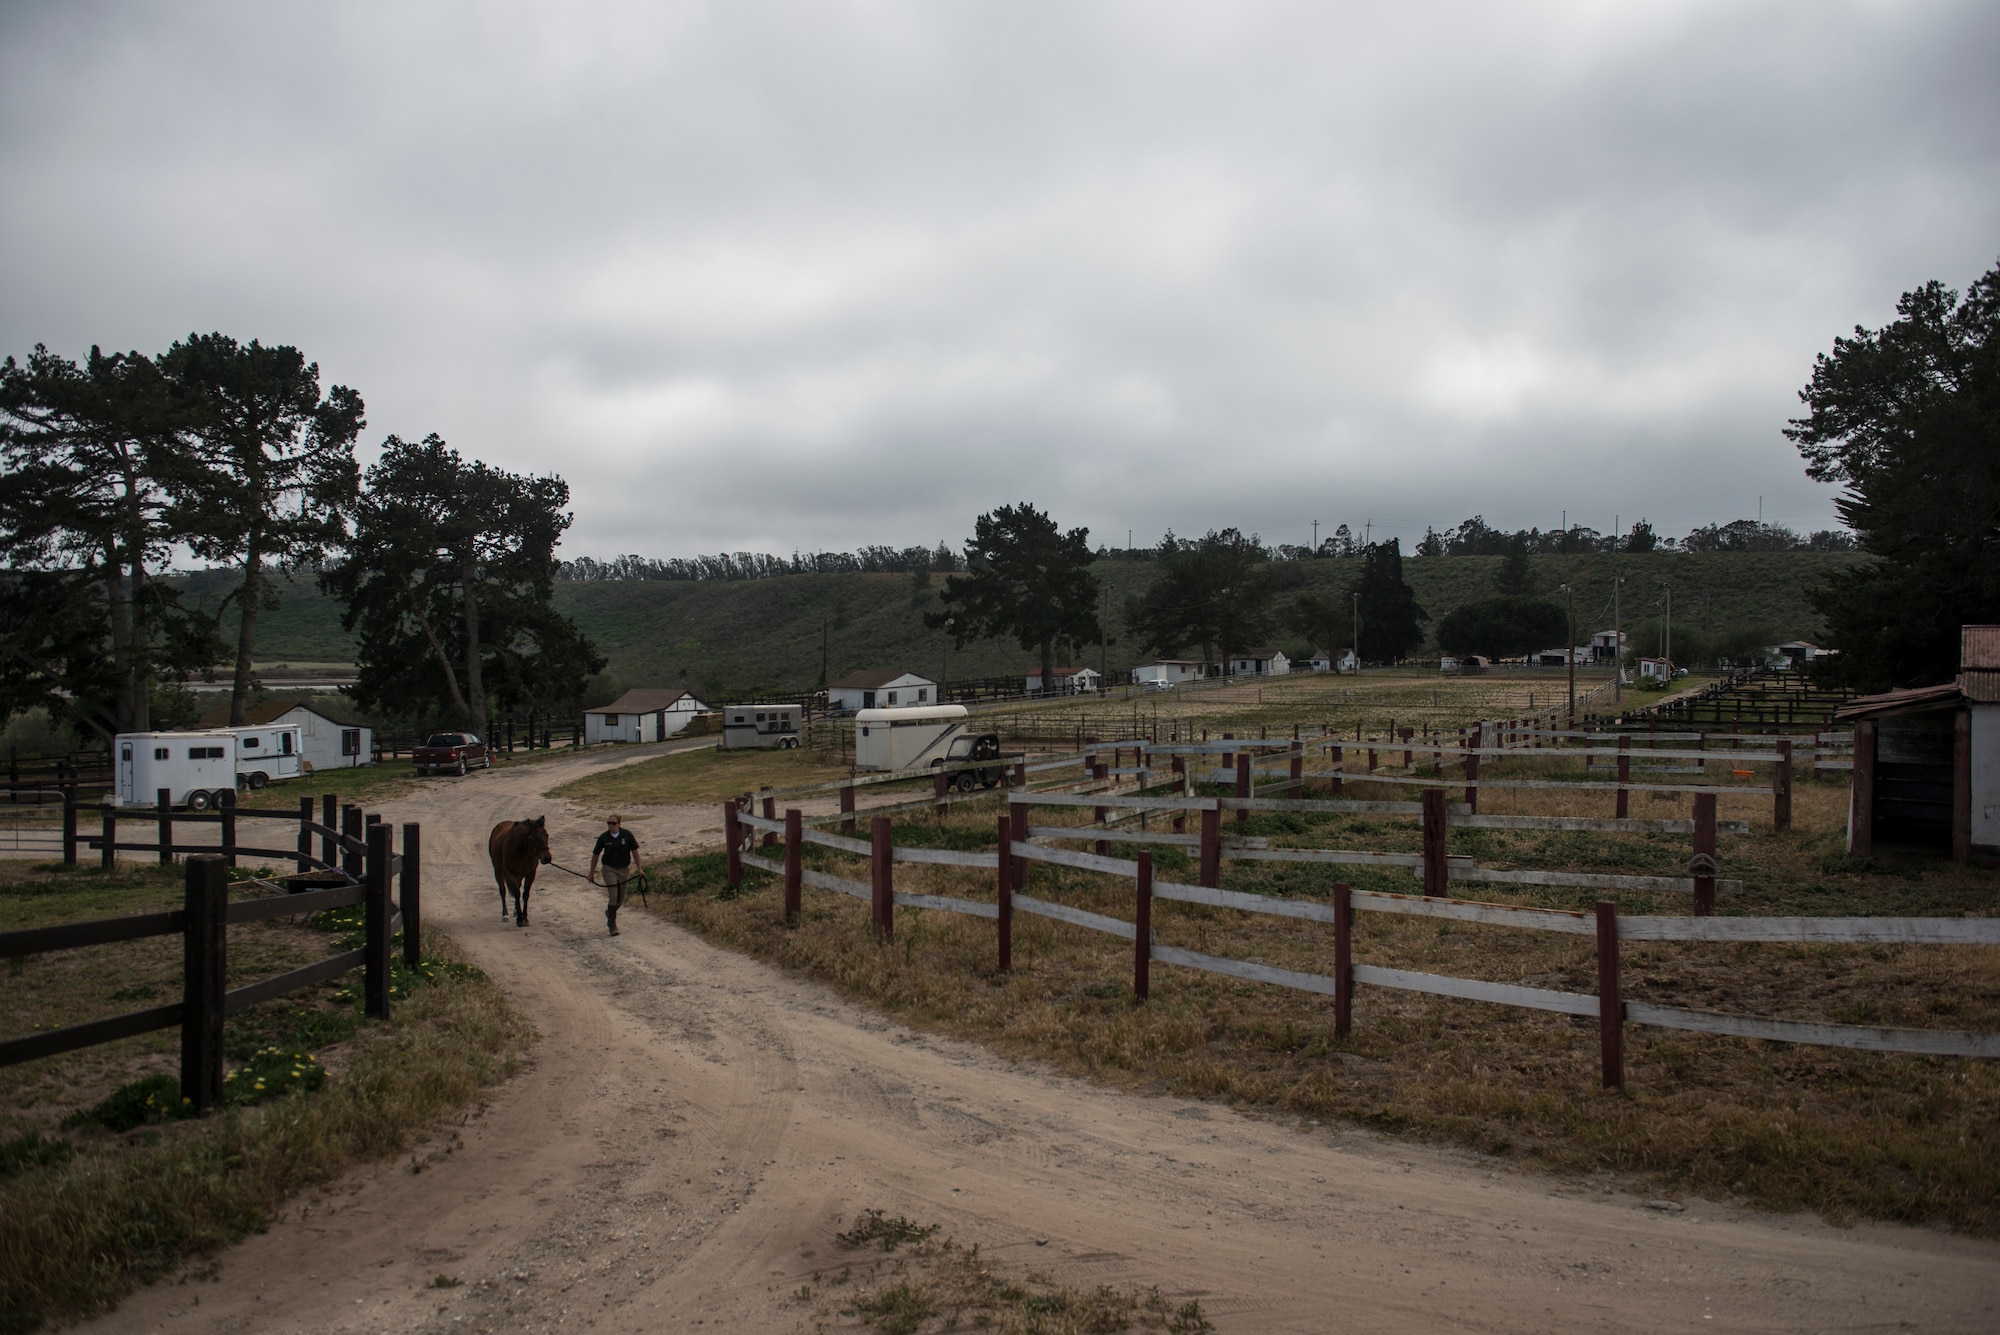 After finishing training for the day Reserve Staff Sgt. Lauren Daniels and Trooper, a military horse, walk back to the stables at the Vandenberg Saddle Club near Vandenberg Air Force Base, California. (U.S. Air Force photo/Staff Sgt. Andrew Lee)